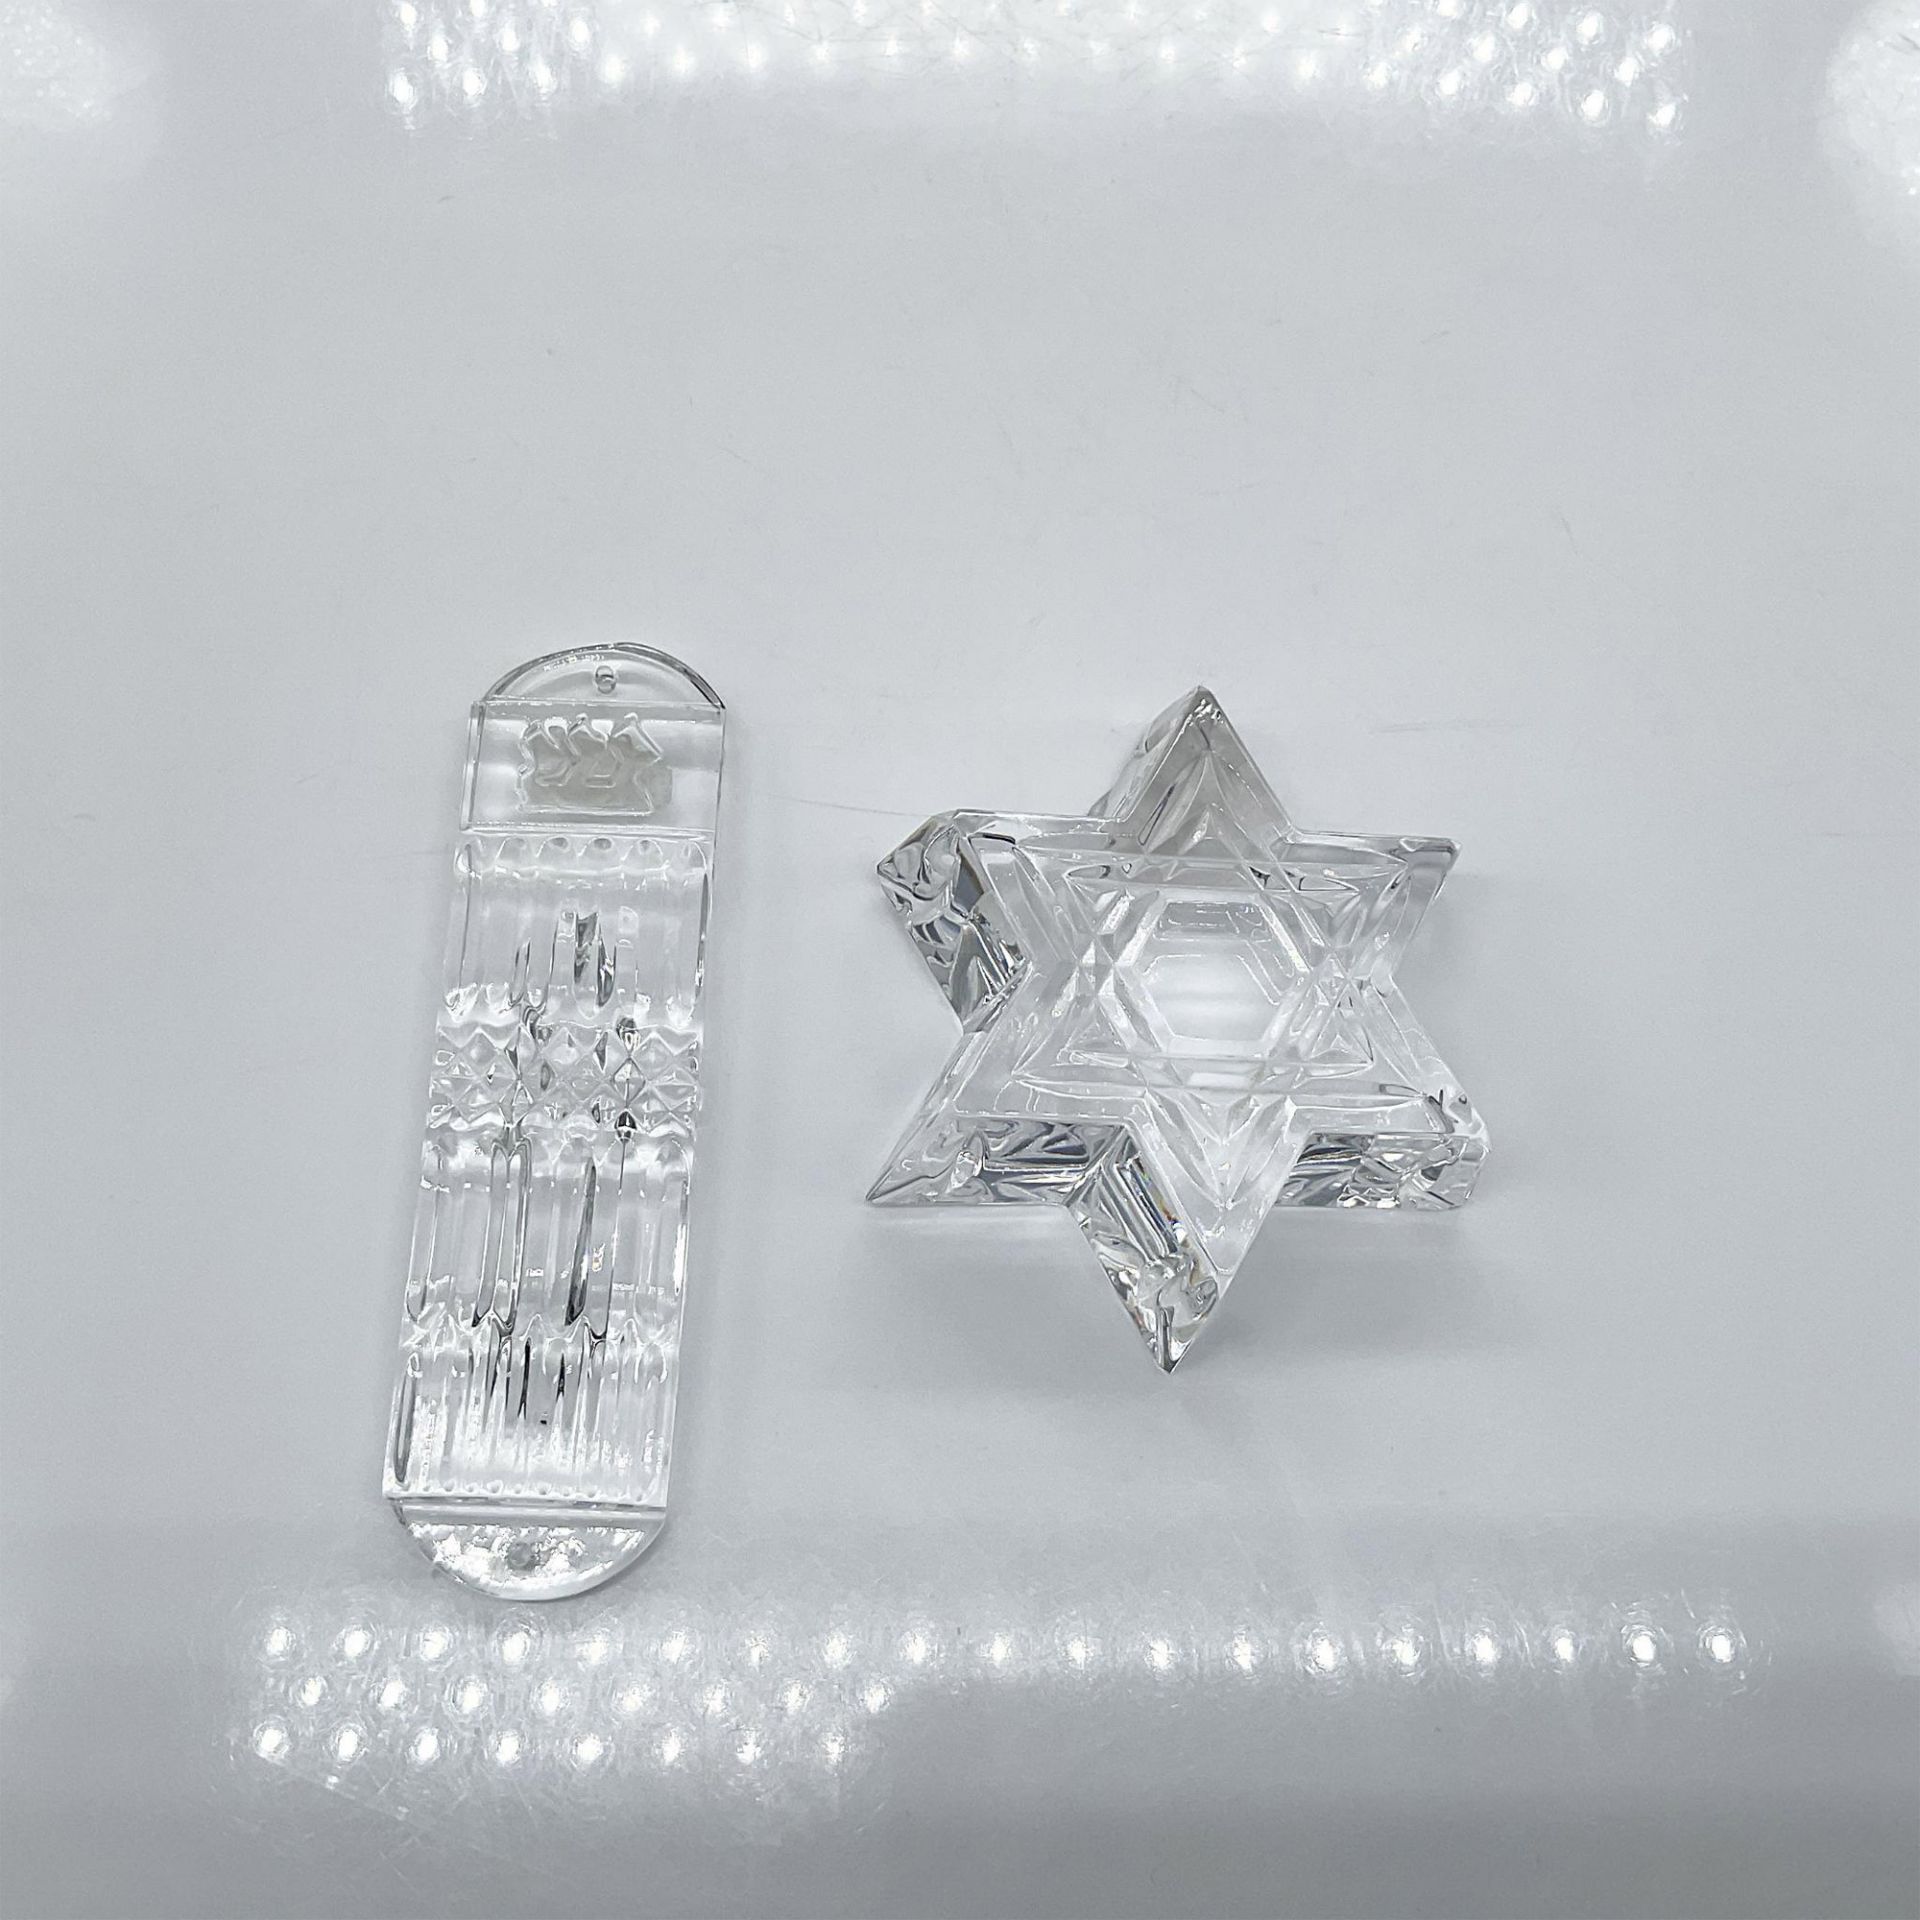 2pc Waterford Mezuzah and Star of David Paperweight - Image 2 of 4